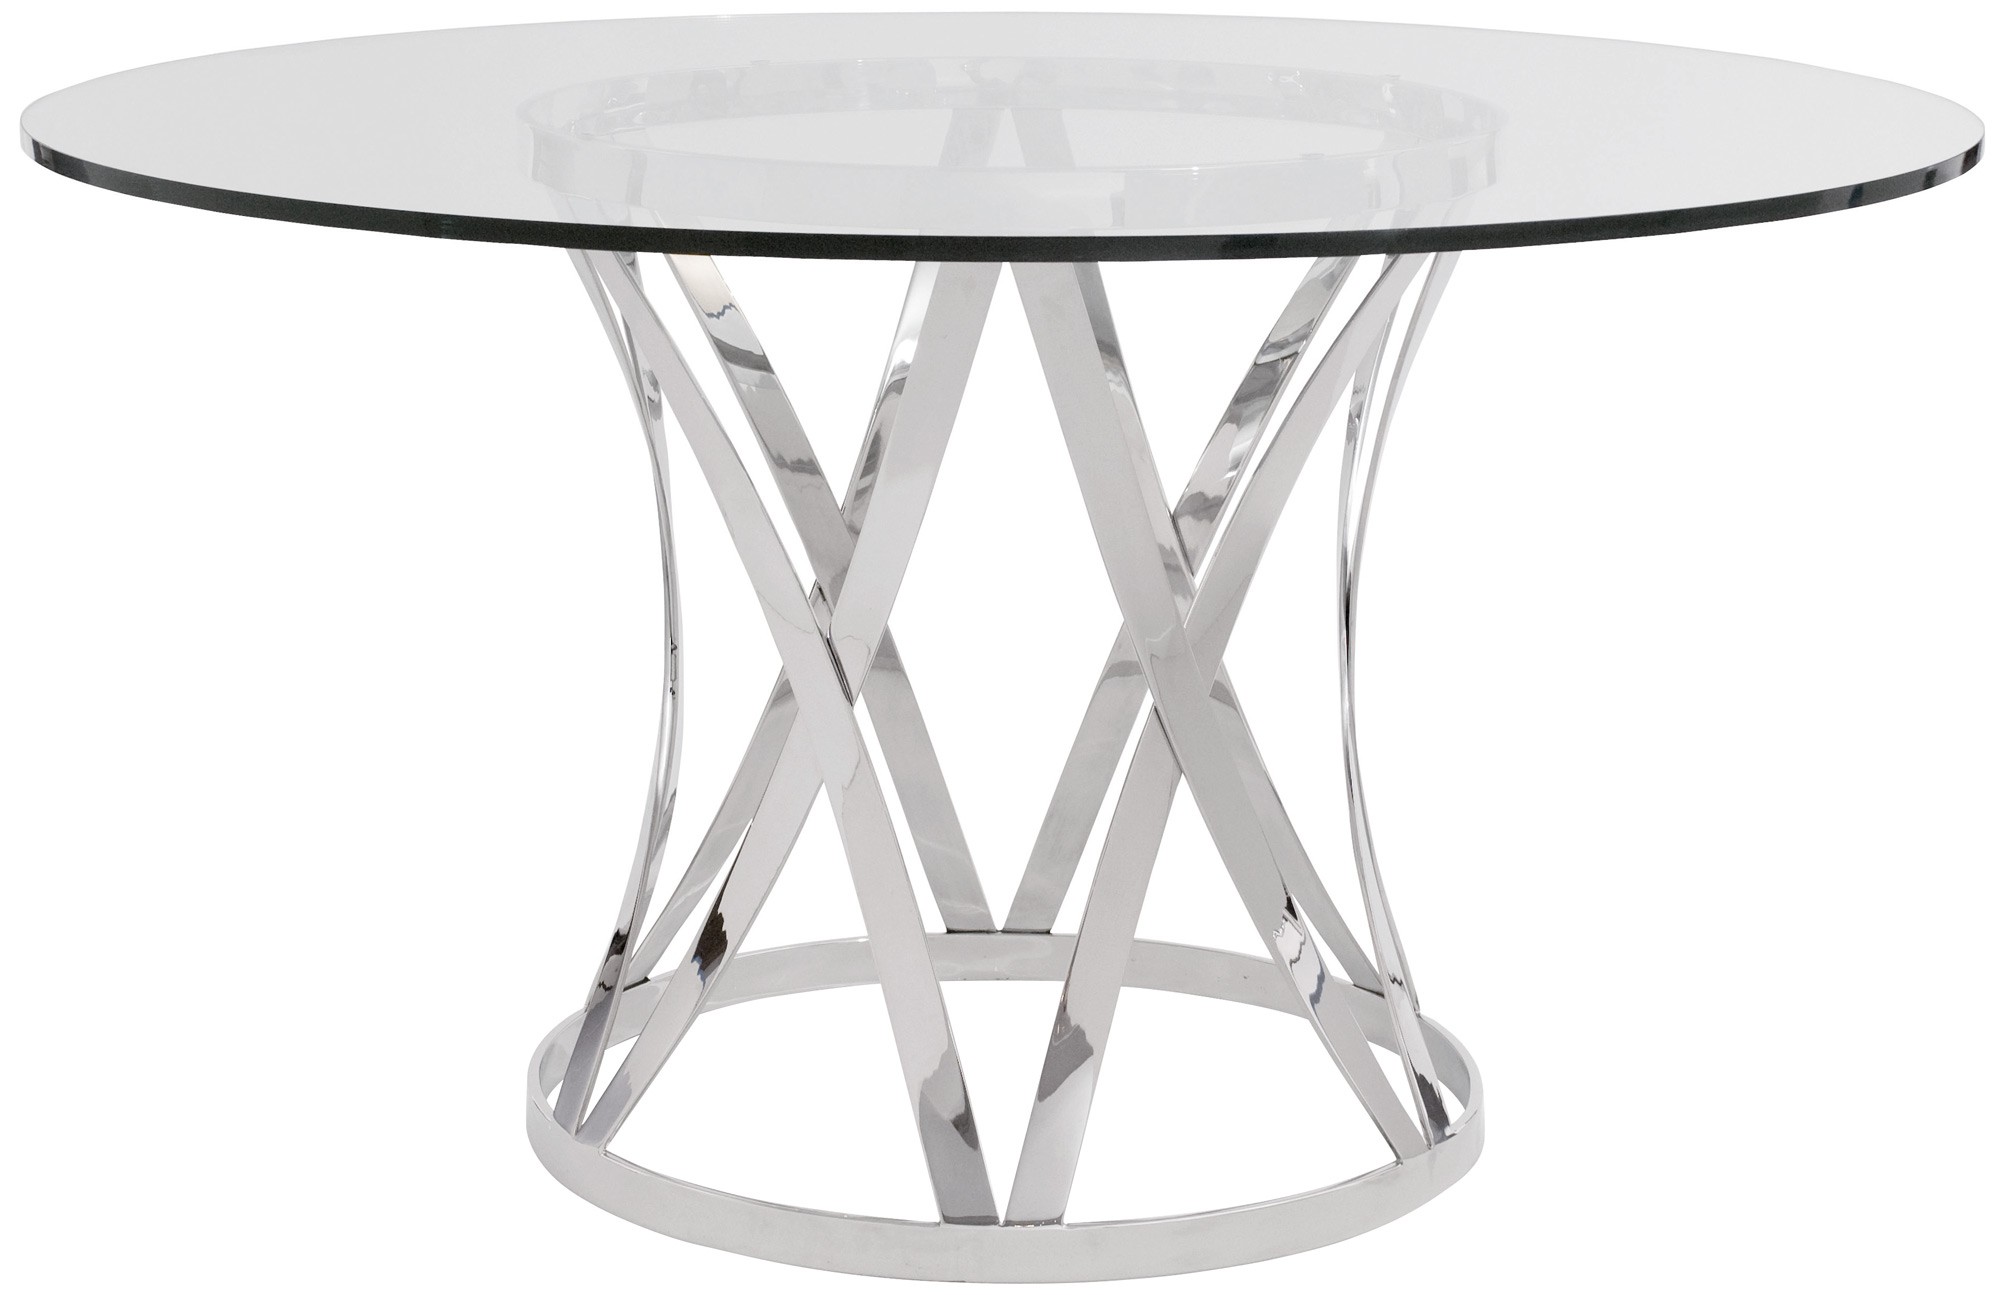 Round dining table furniture designs contemporary glass top round